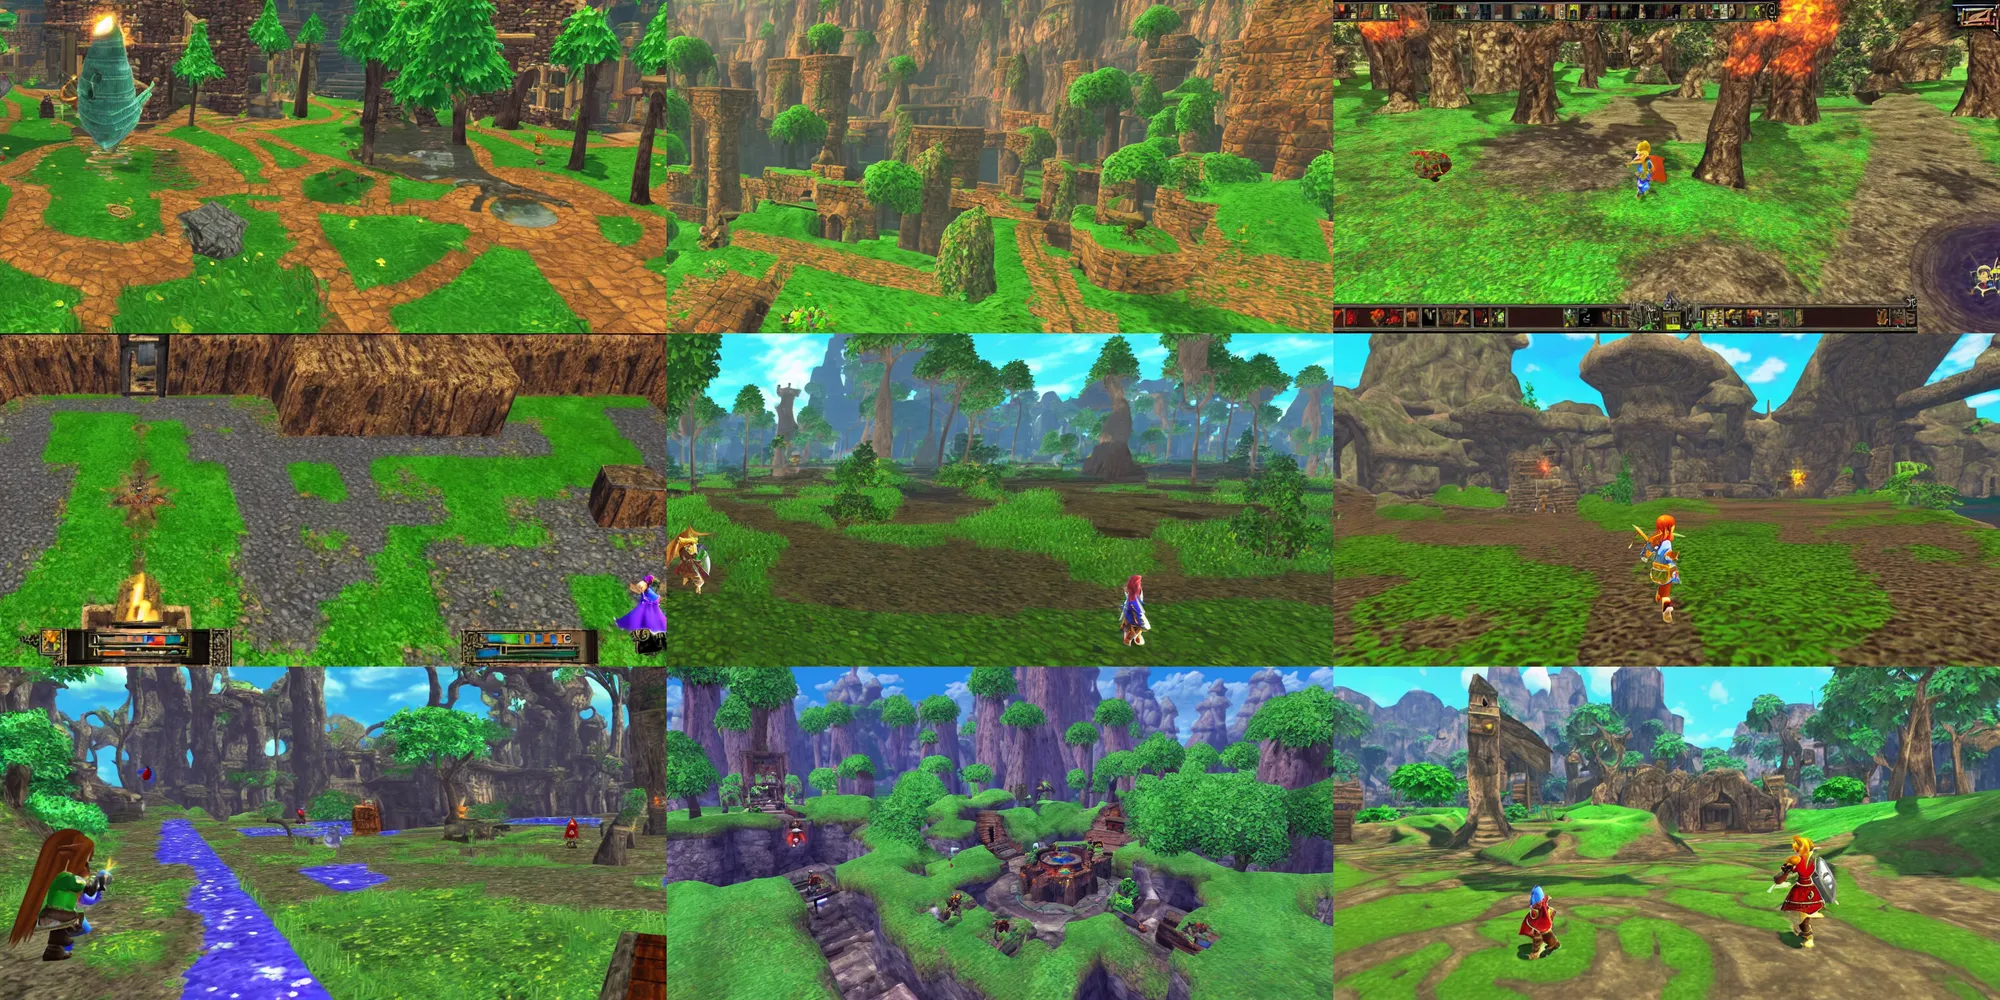 Prompt: A stunning screenshot of a unique area in The Legend of Zelda: Ocarina of Time